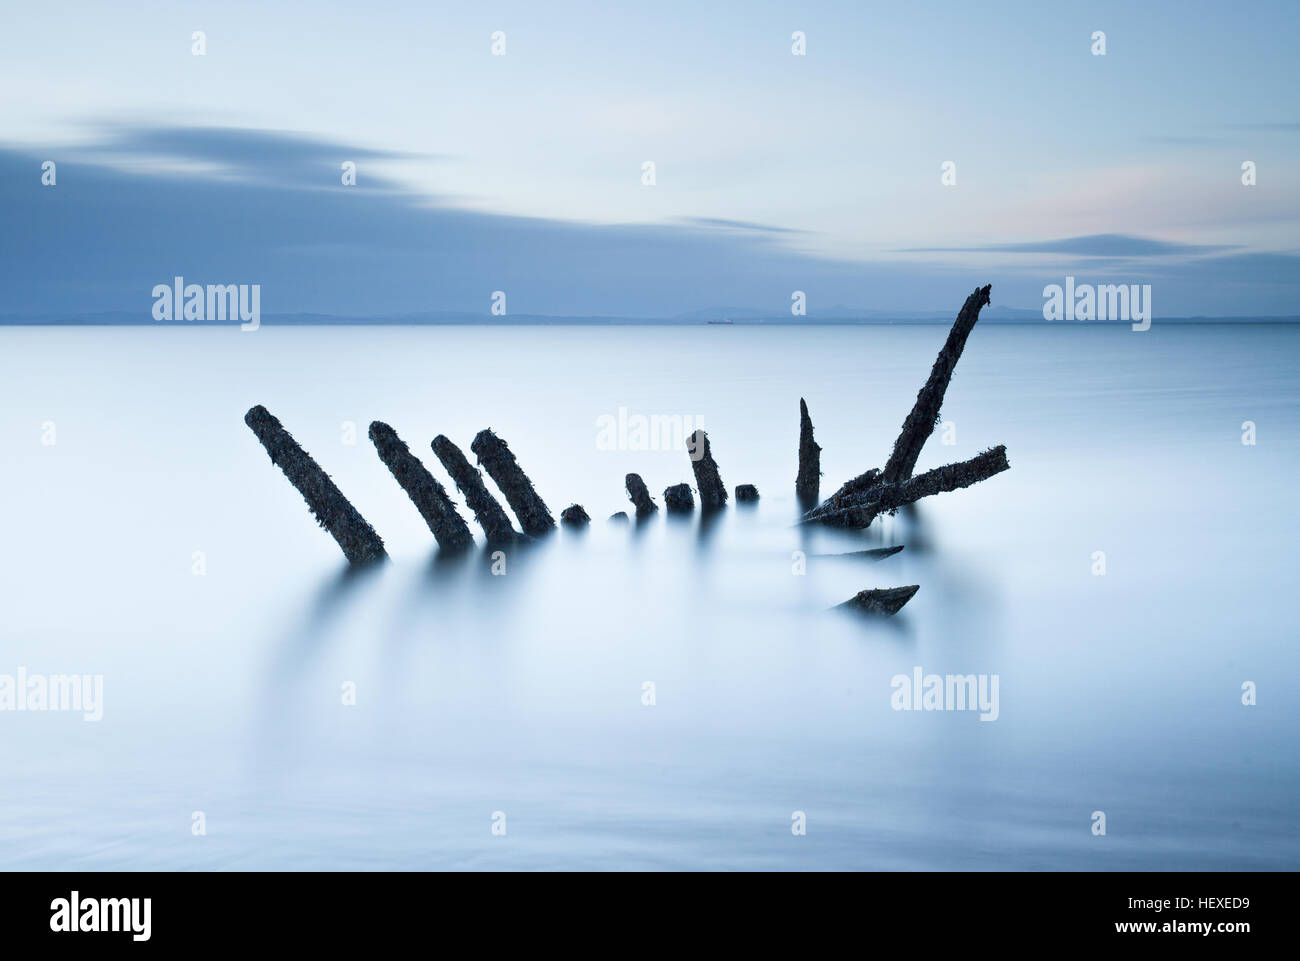 Longniddry ship wreck, the remains of an old ship wreck on the shore of the Firth of Forth estuary near Edinburgh, Scotland Stock Photo